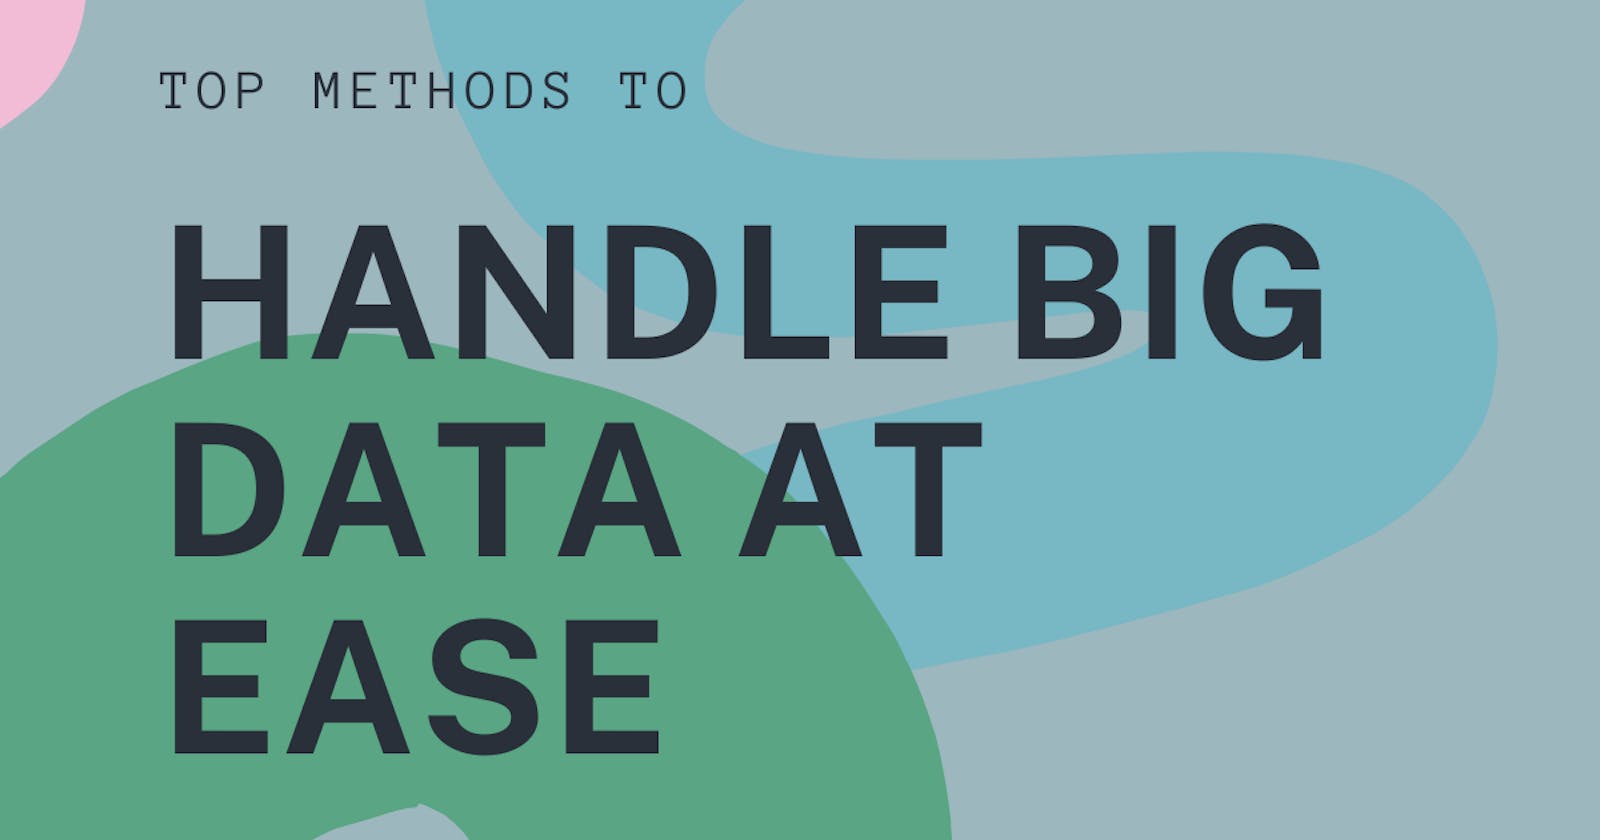 Sizes of Data ? how to handle large scale datasets efficiently.